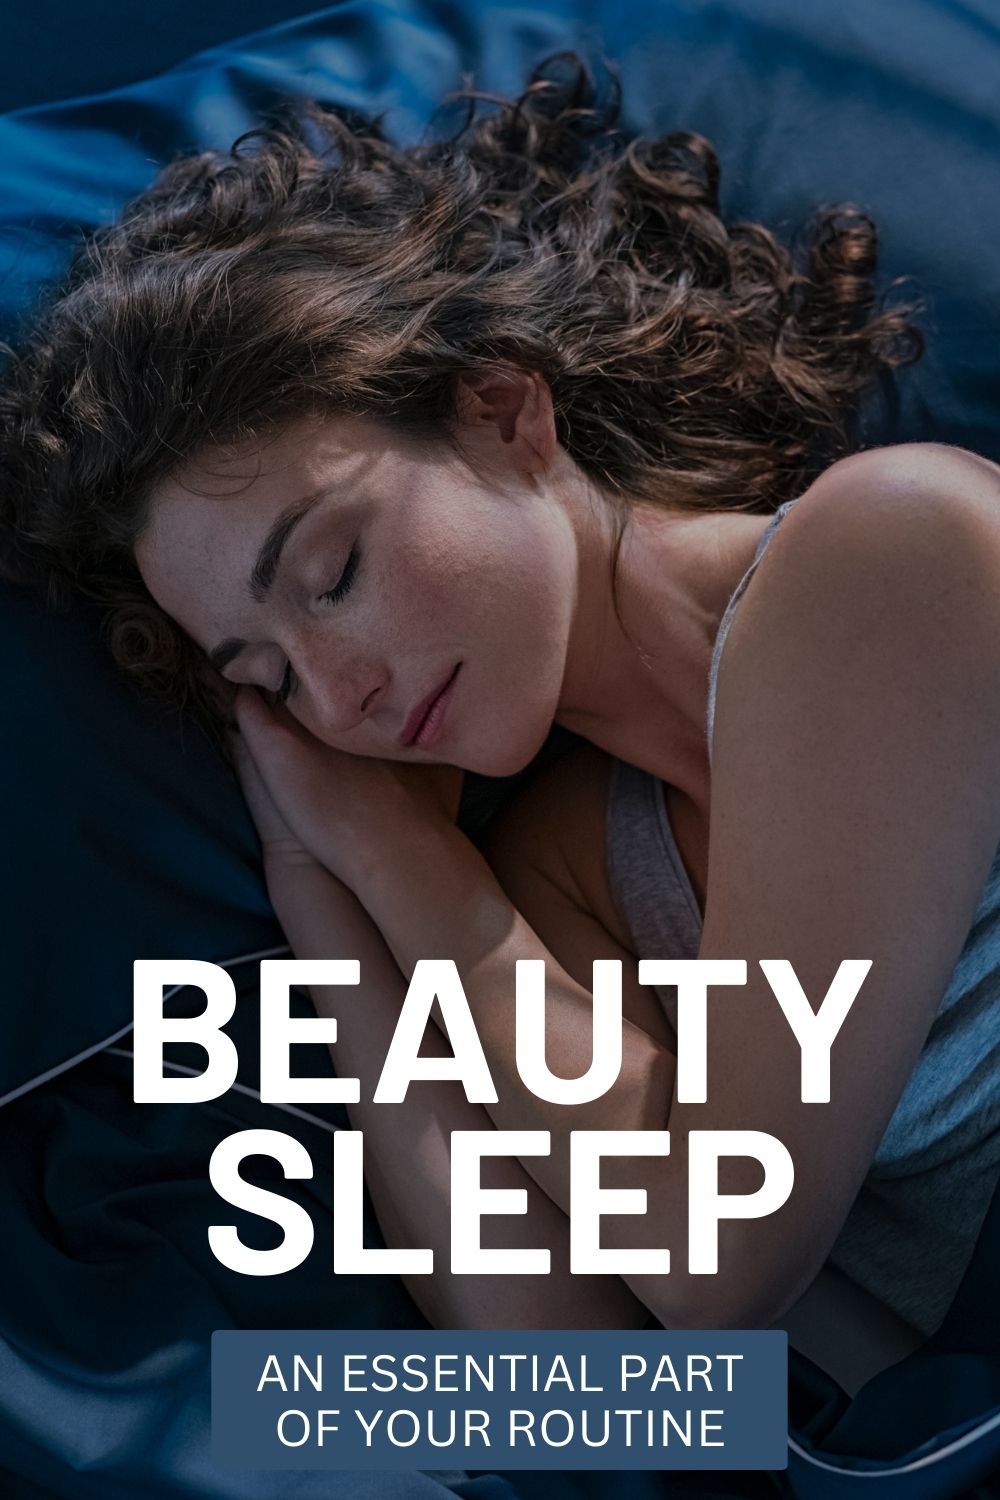 Beauty Sleep Should Be An Essential Part Of Your Routine